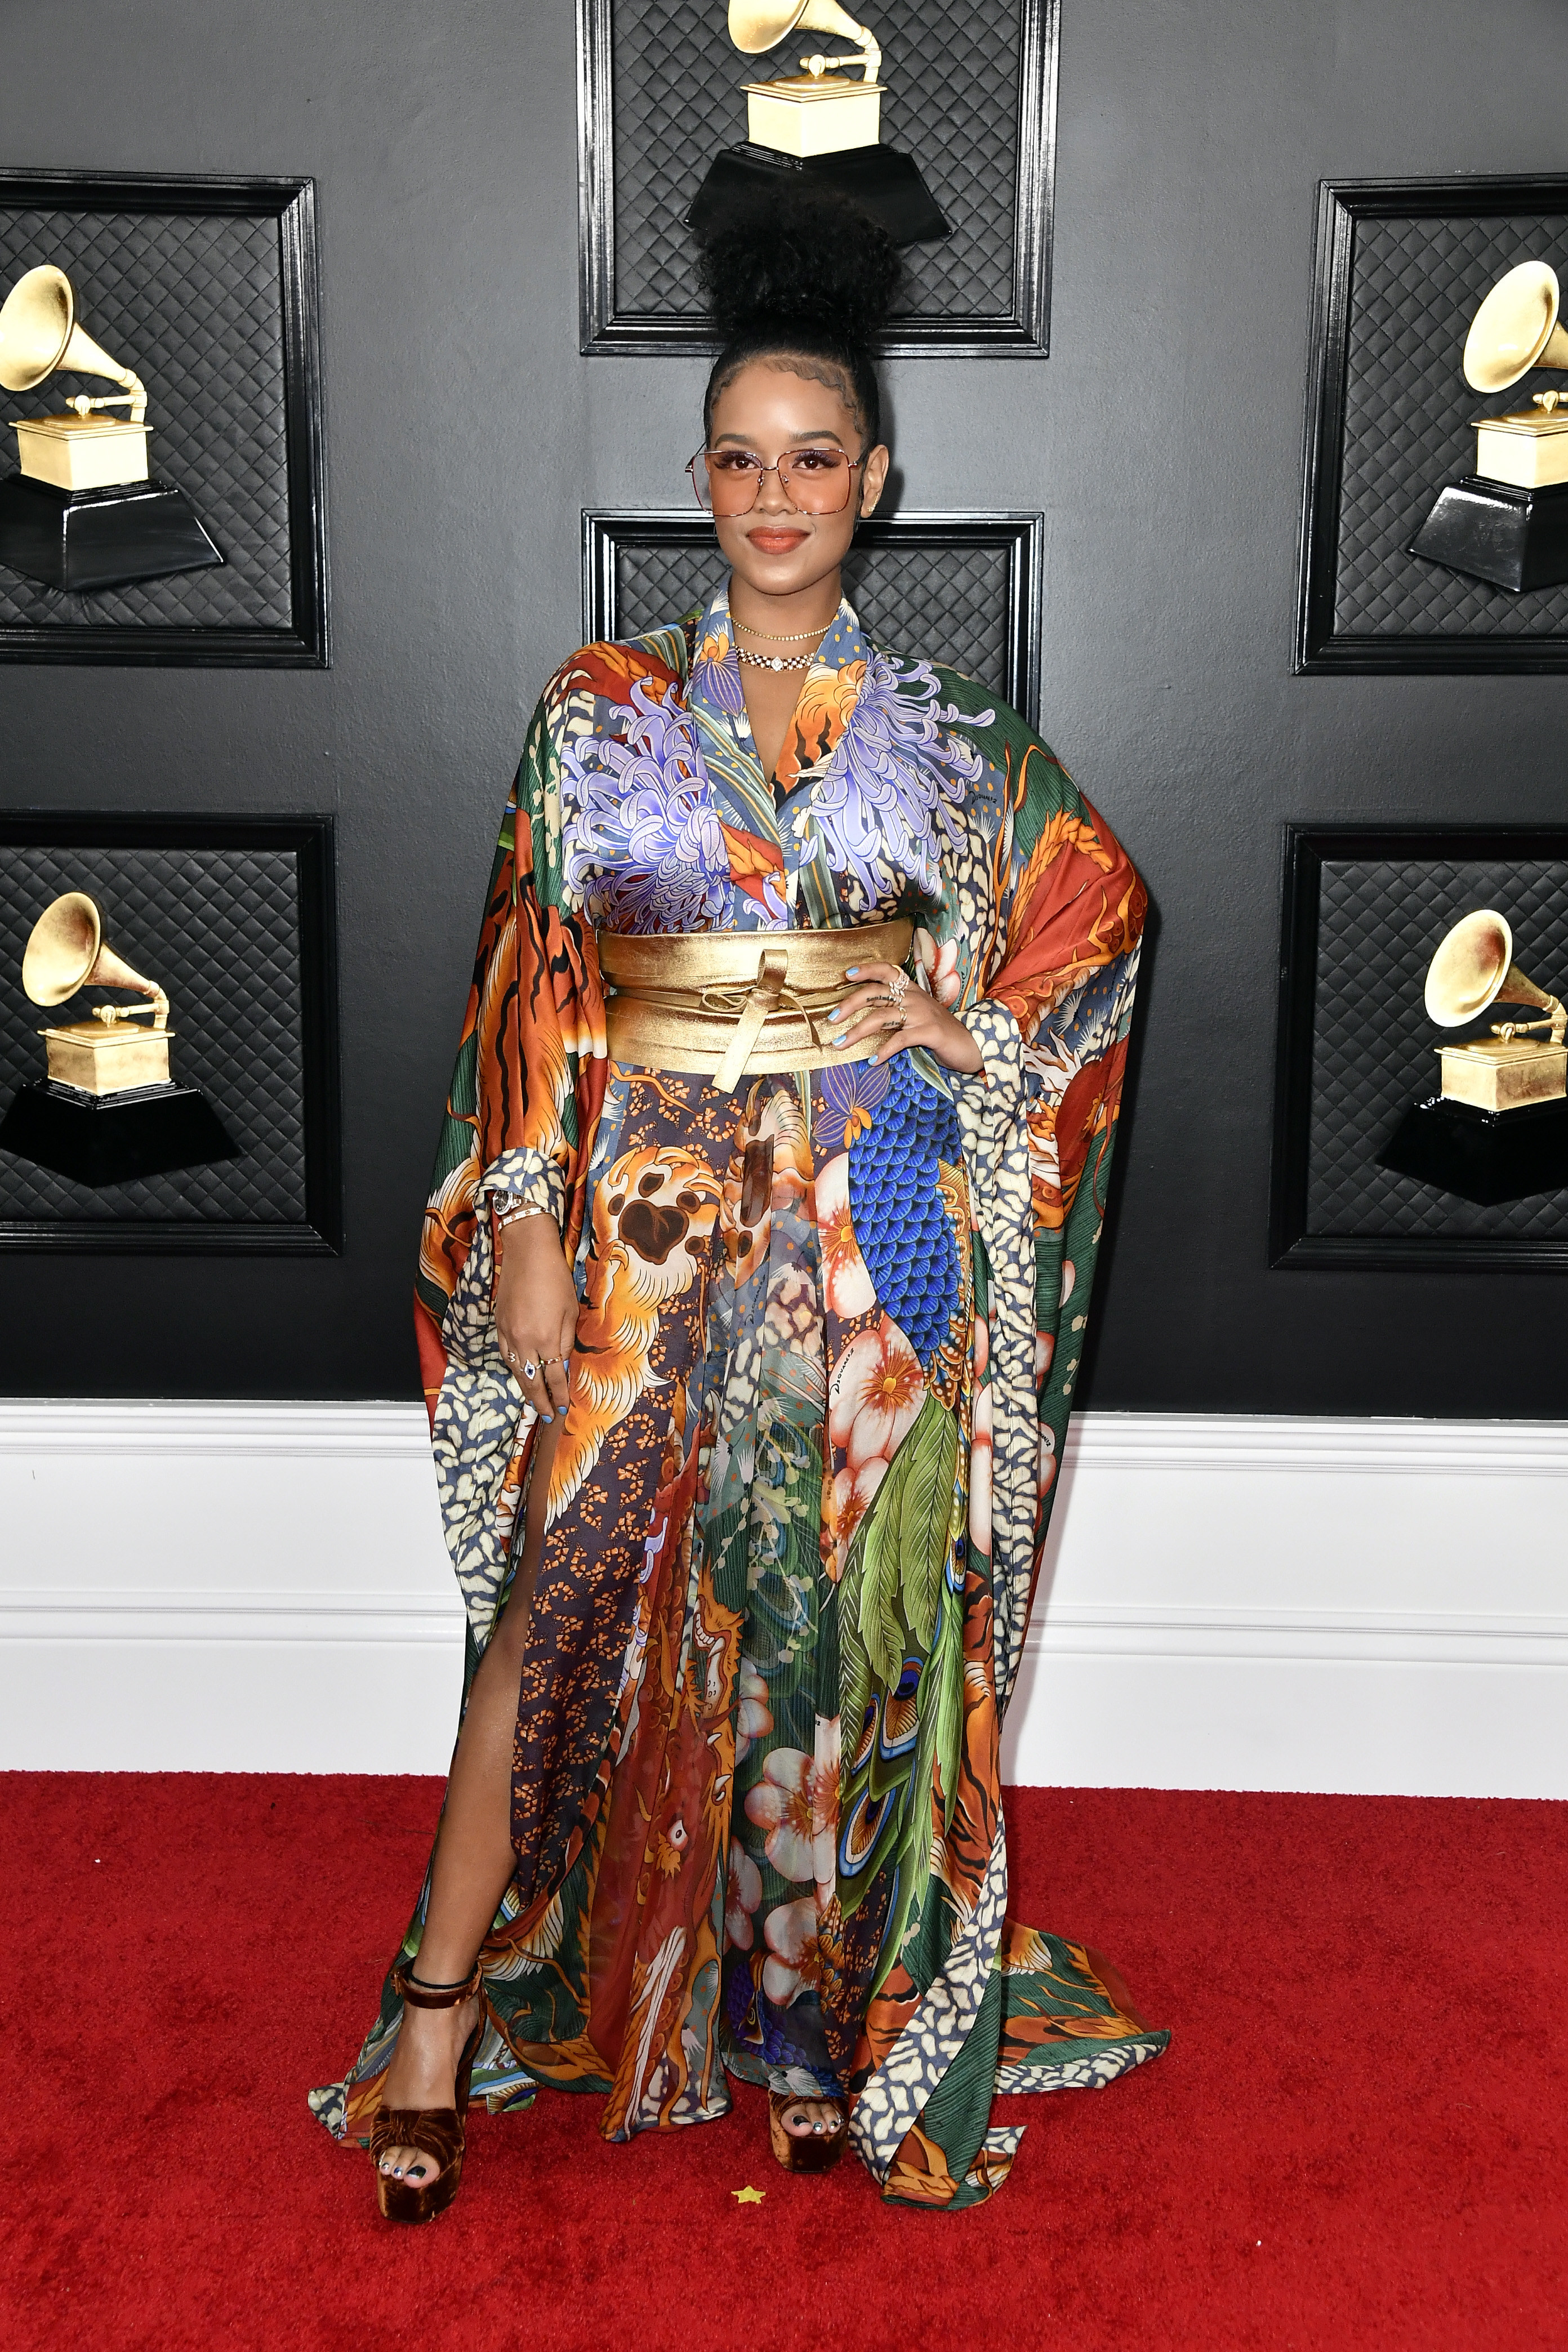 2020 Grammys The Best Looks On The Red Carpet From Billie Eilish